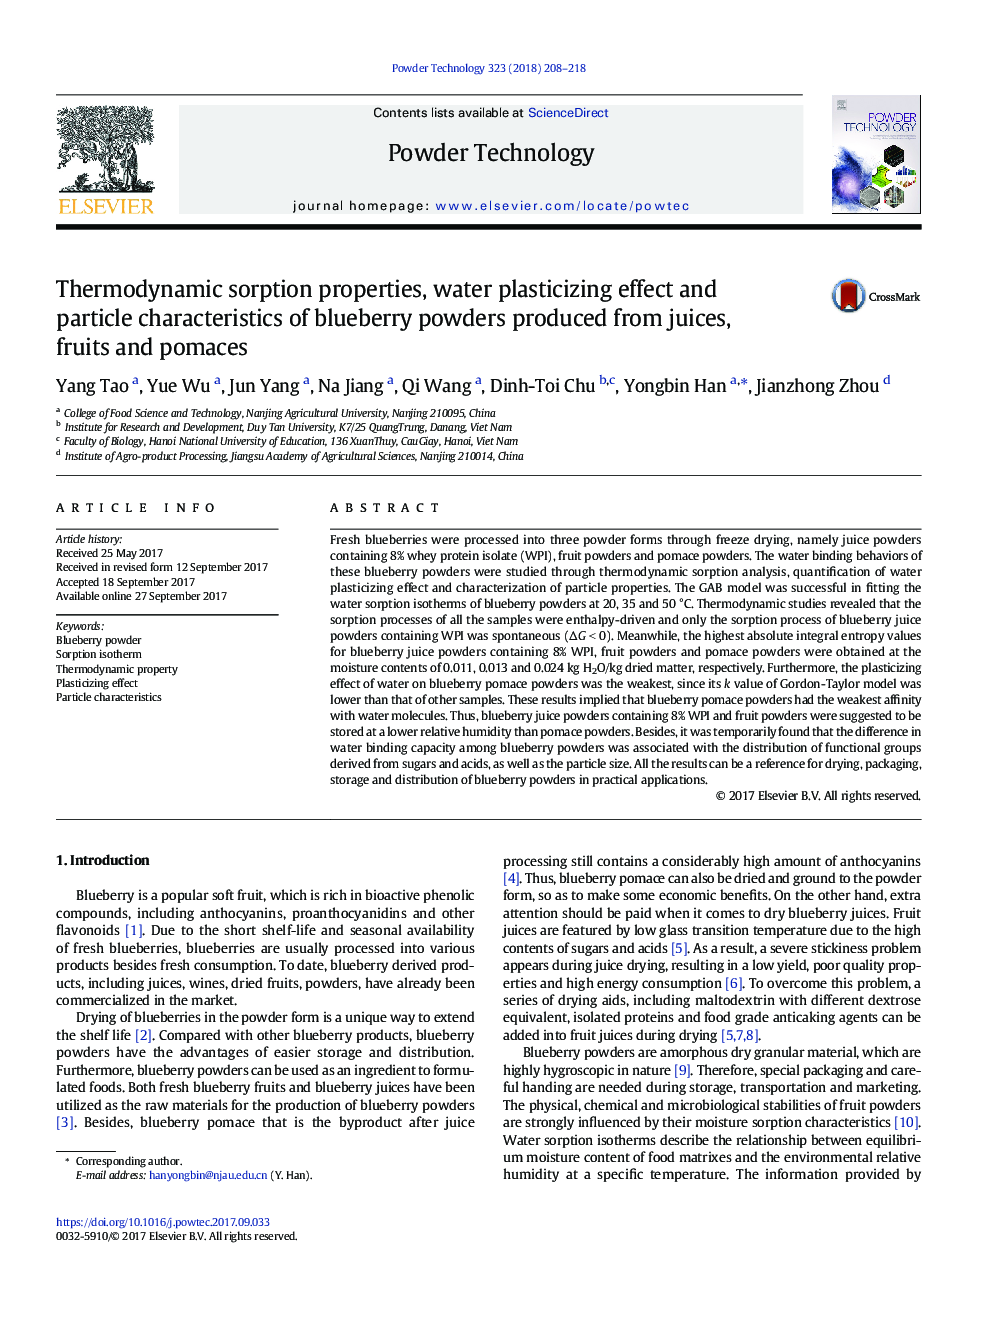 Thermodynamic sorption properties, water plasticizing effect and particle characteristics of blueberry powders produced from juices, fruits and pomaces